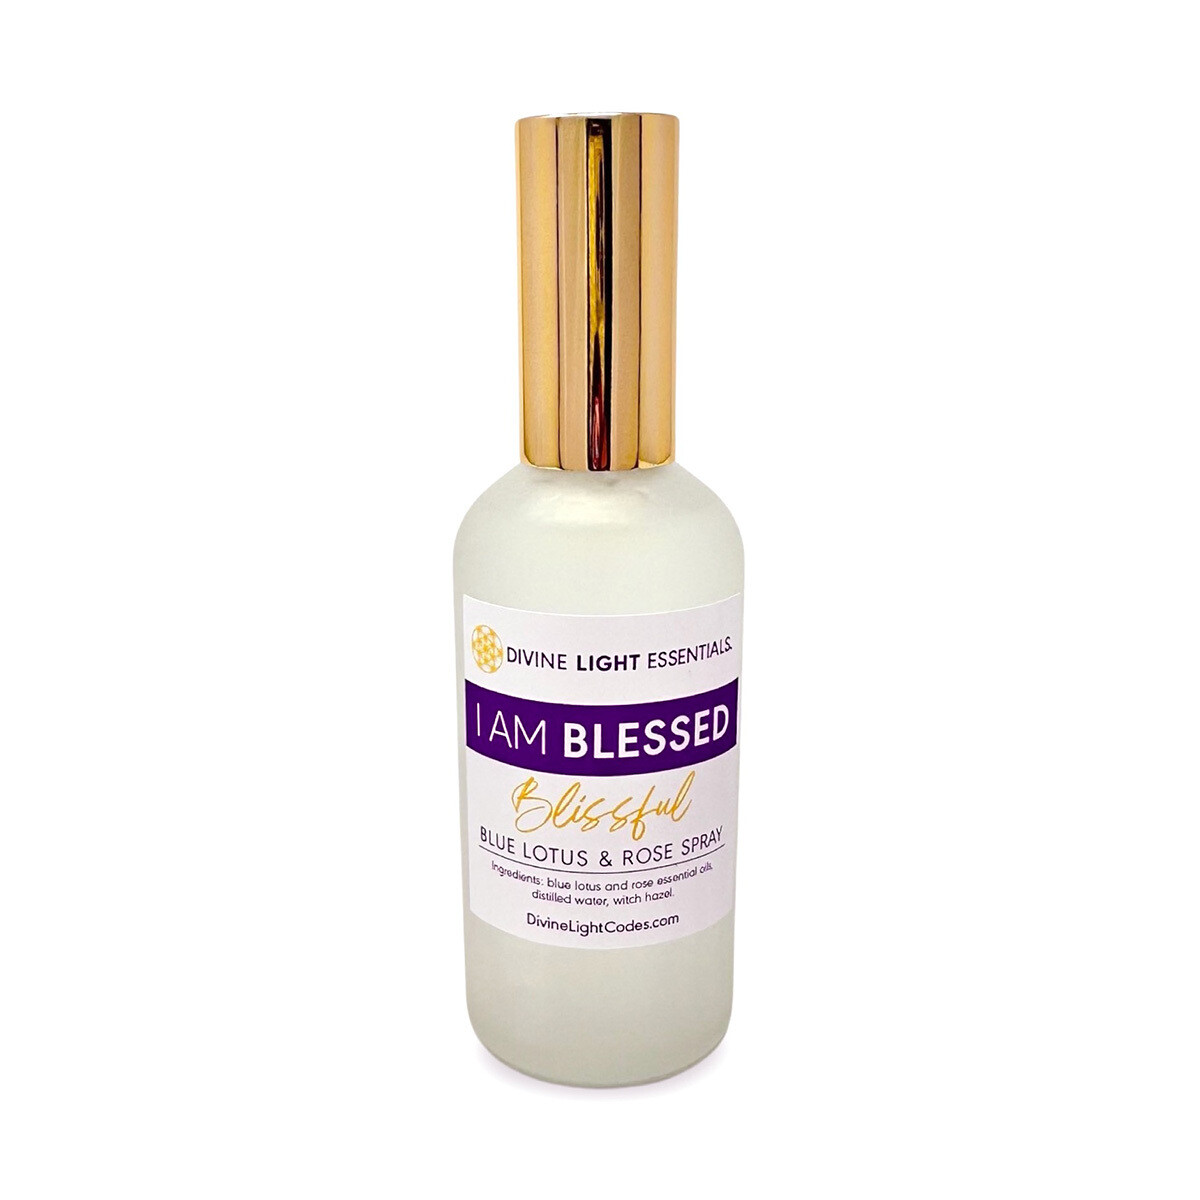 I Am Blessed Spray: Body Blessing or Room Clearing with Blue Lotus & Rose Essential Oils